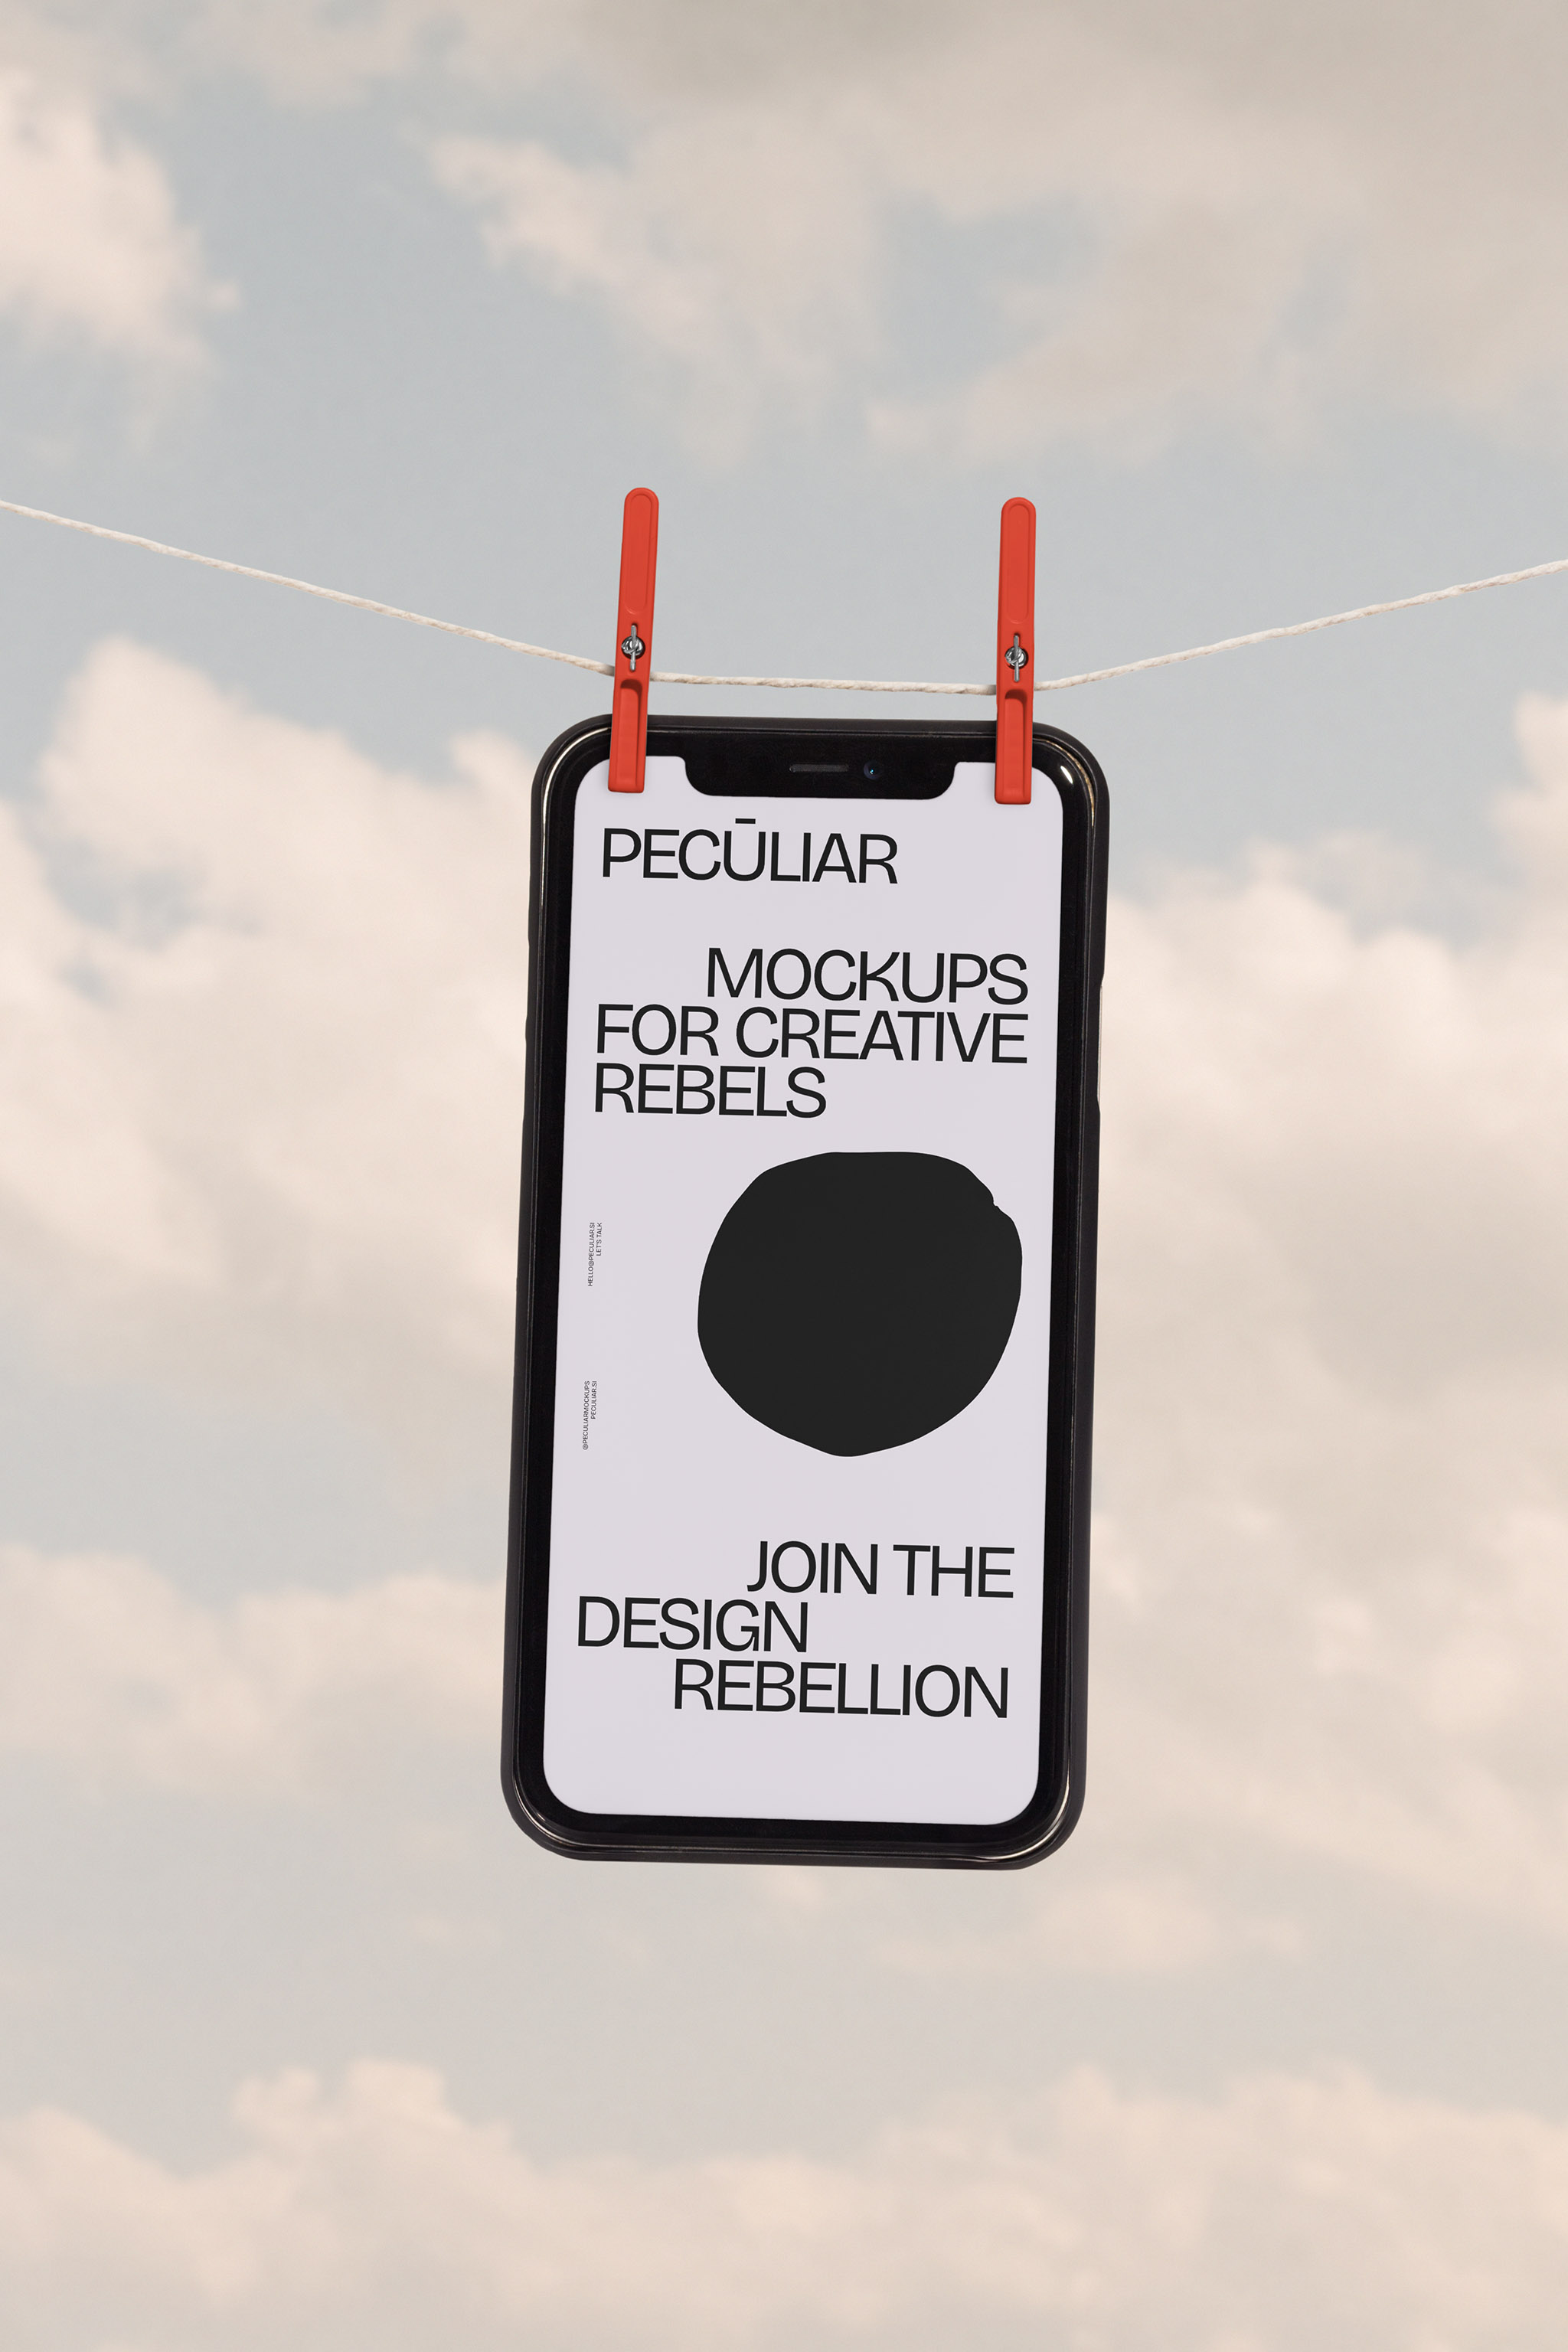 Large floating iPhone device mockup hung with clothespins in the air against a cloudy sky background, in use example alternative colors.